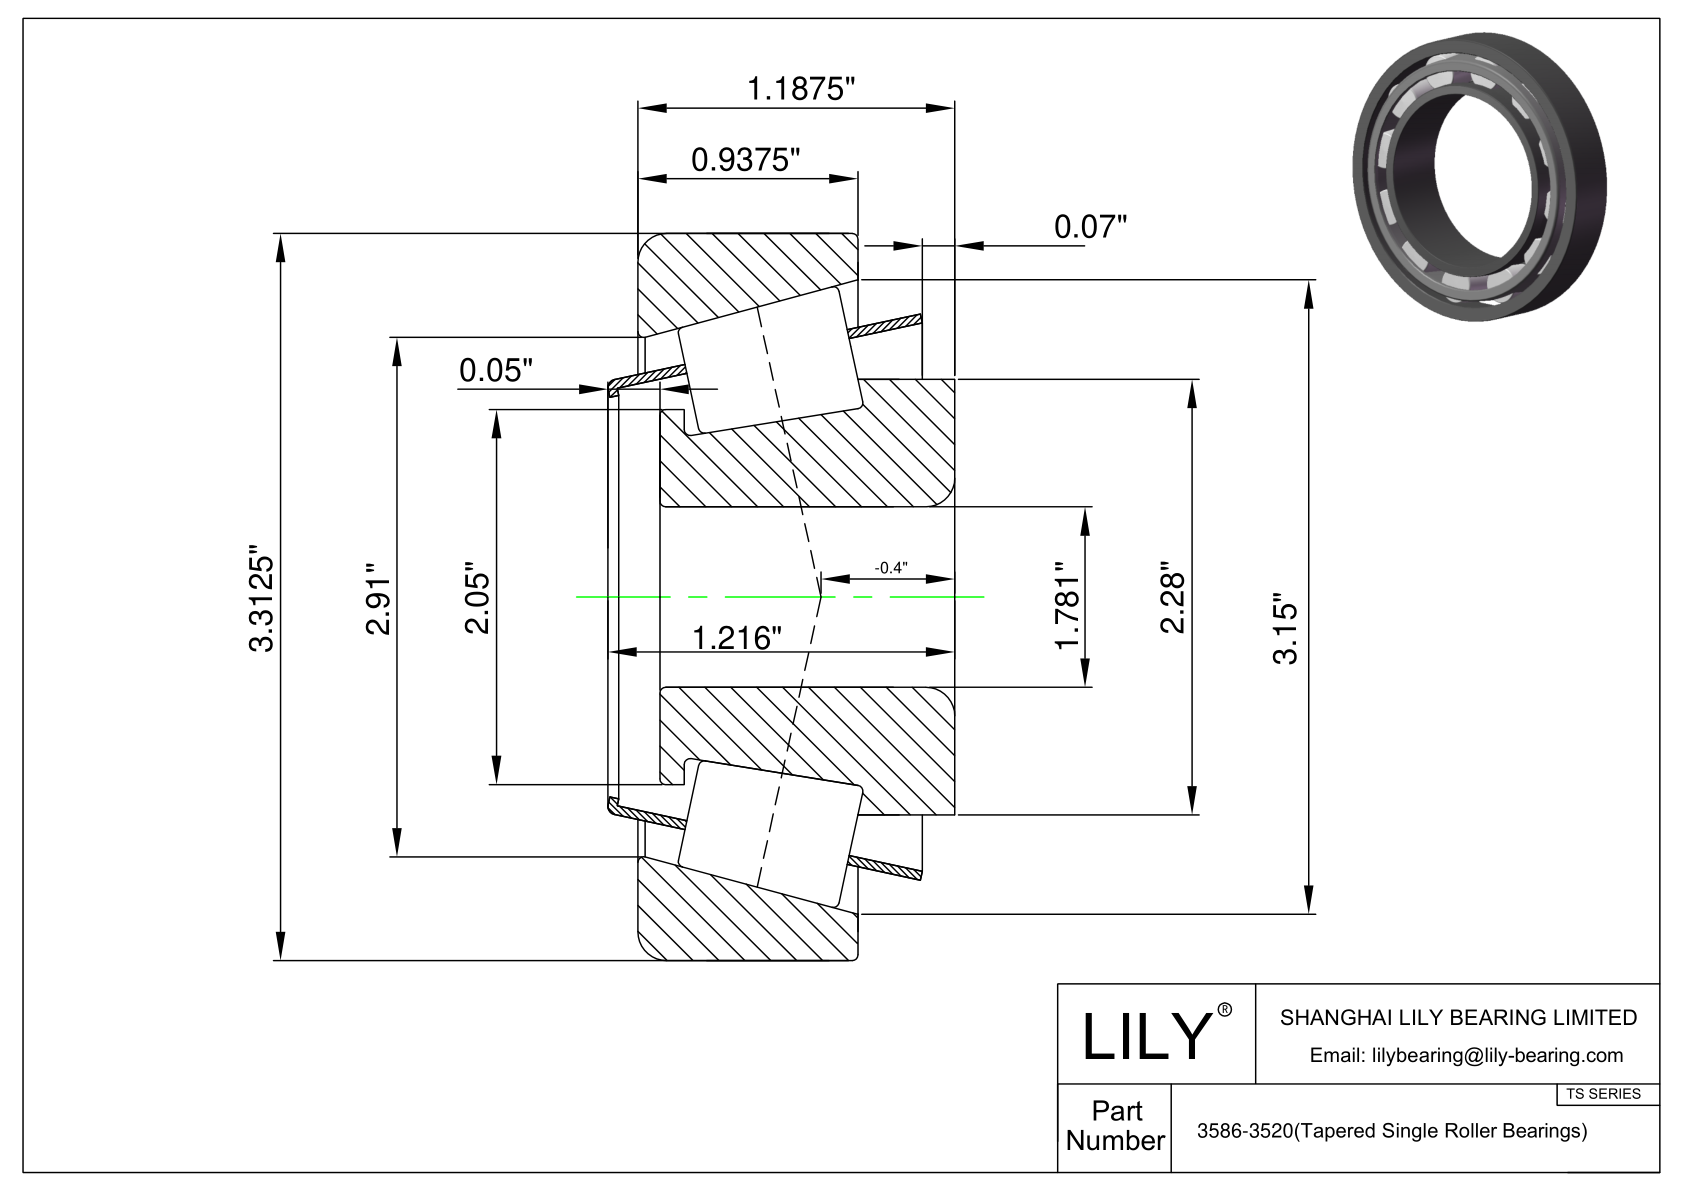 3586-3520 TS (Tapered Single Roller Bearings) (Imperial) cad drawing